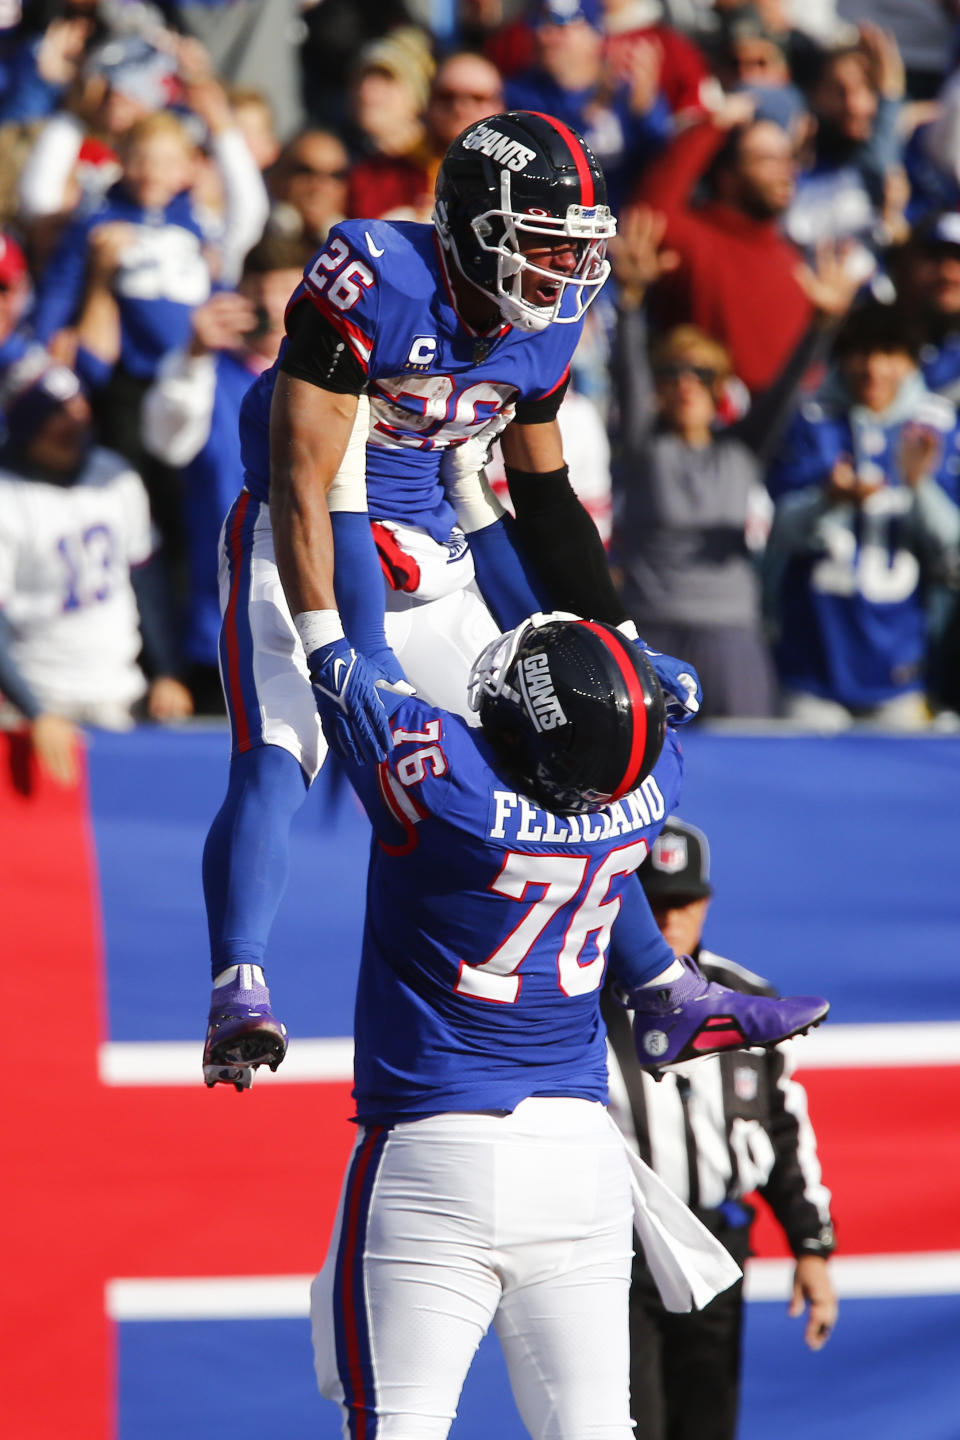 New York Giants' Saquon Barkley, left, celebrates his touchdown with Jon Feliciano during the first half of an NFL football game against the Washington Commanders, Sunday, Dec. 4, 2022, in East Rutherford, N.J. (AP Photo/John Munson)